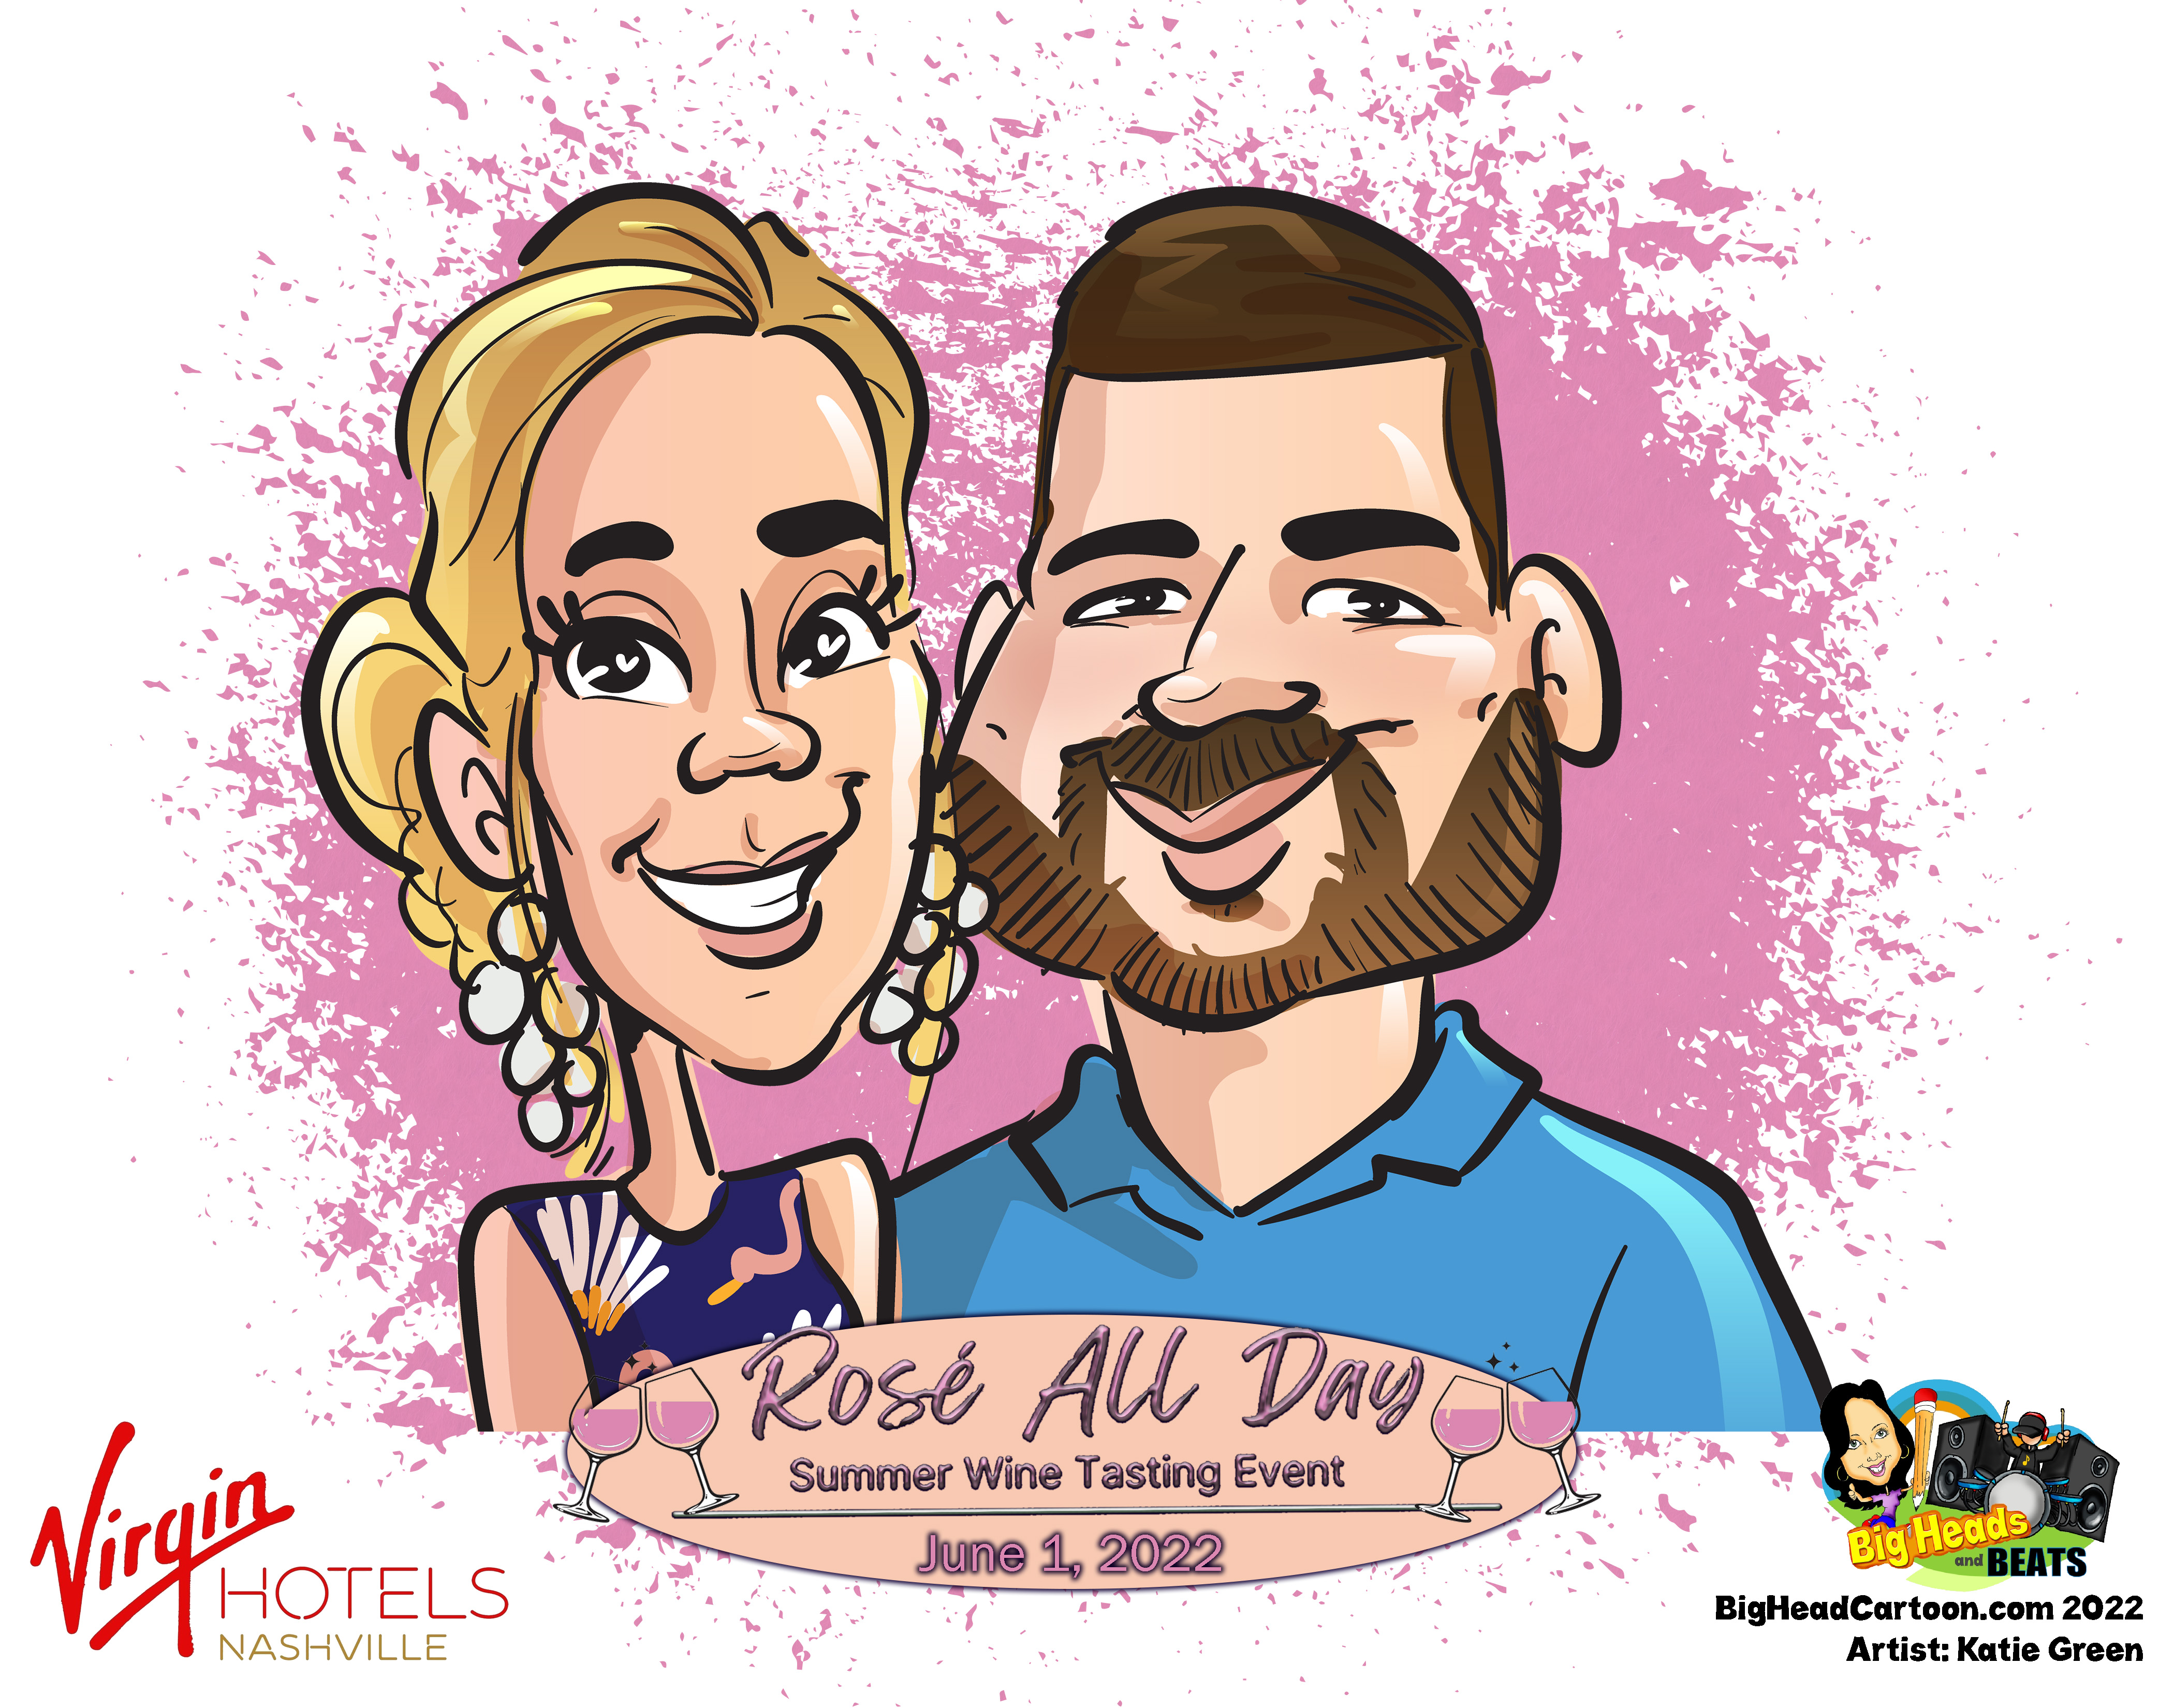 Tradeshow Caricatures, Hybrid Caricature Art Photo Booth, Hybrid Events, Hybrid Event, Live Event Caricatures, Caricature Artist, Trade Show Caricatures, Conference Tradeshow